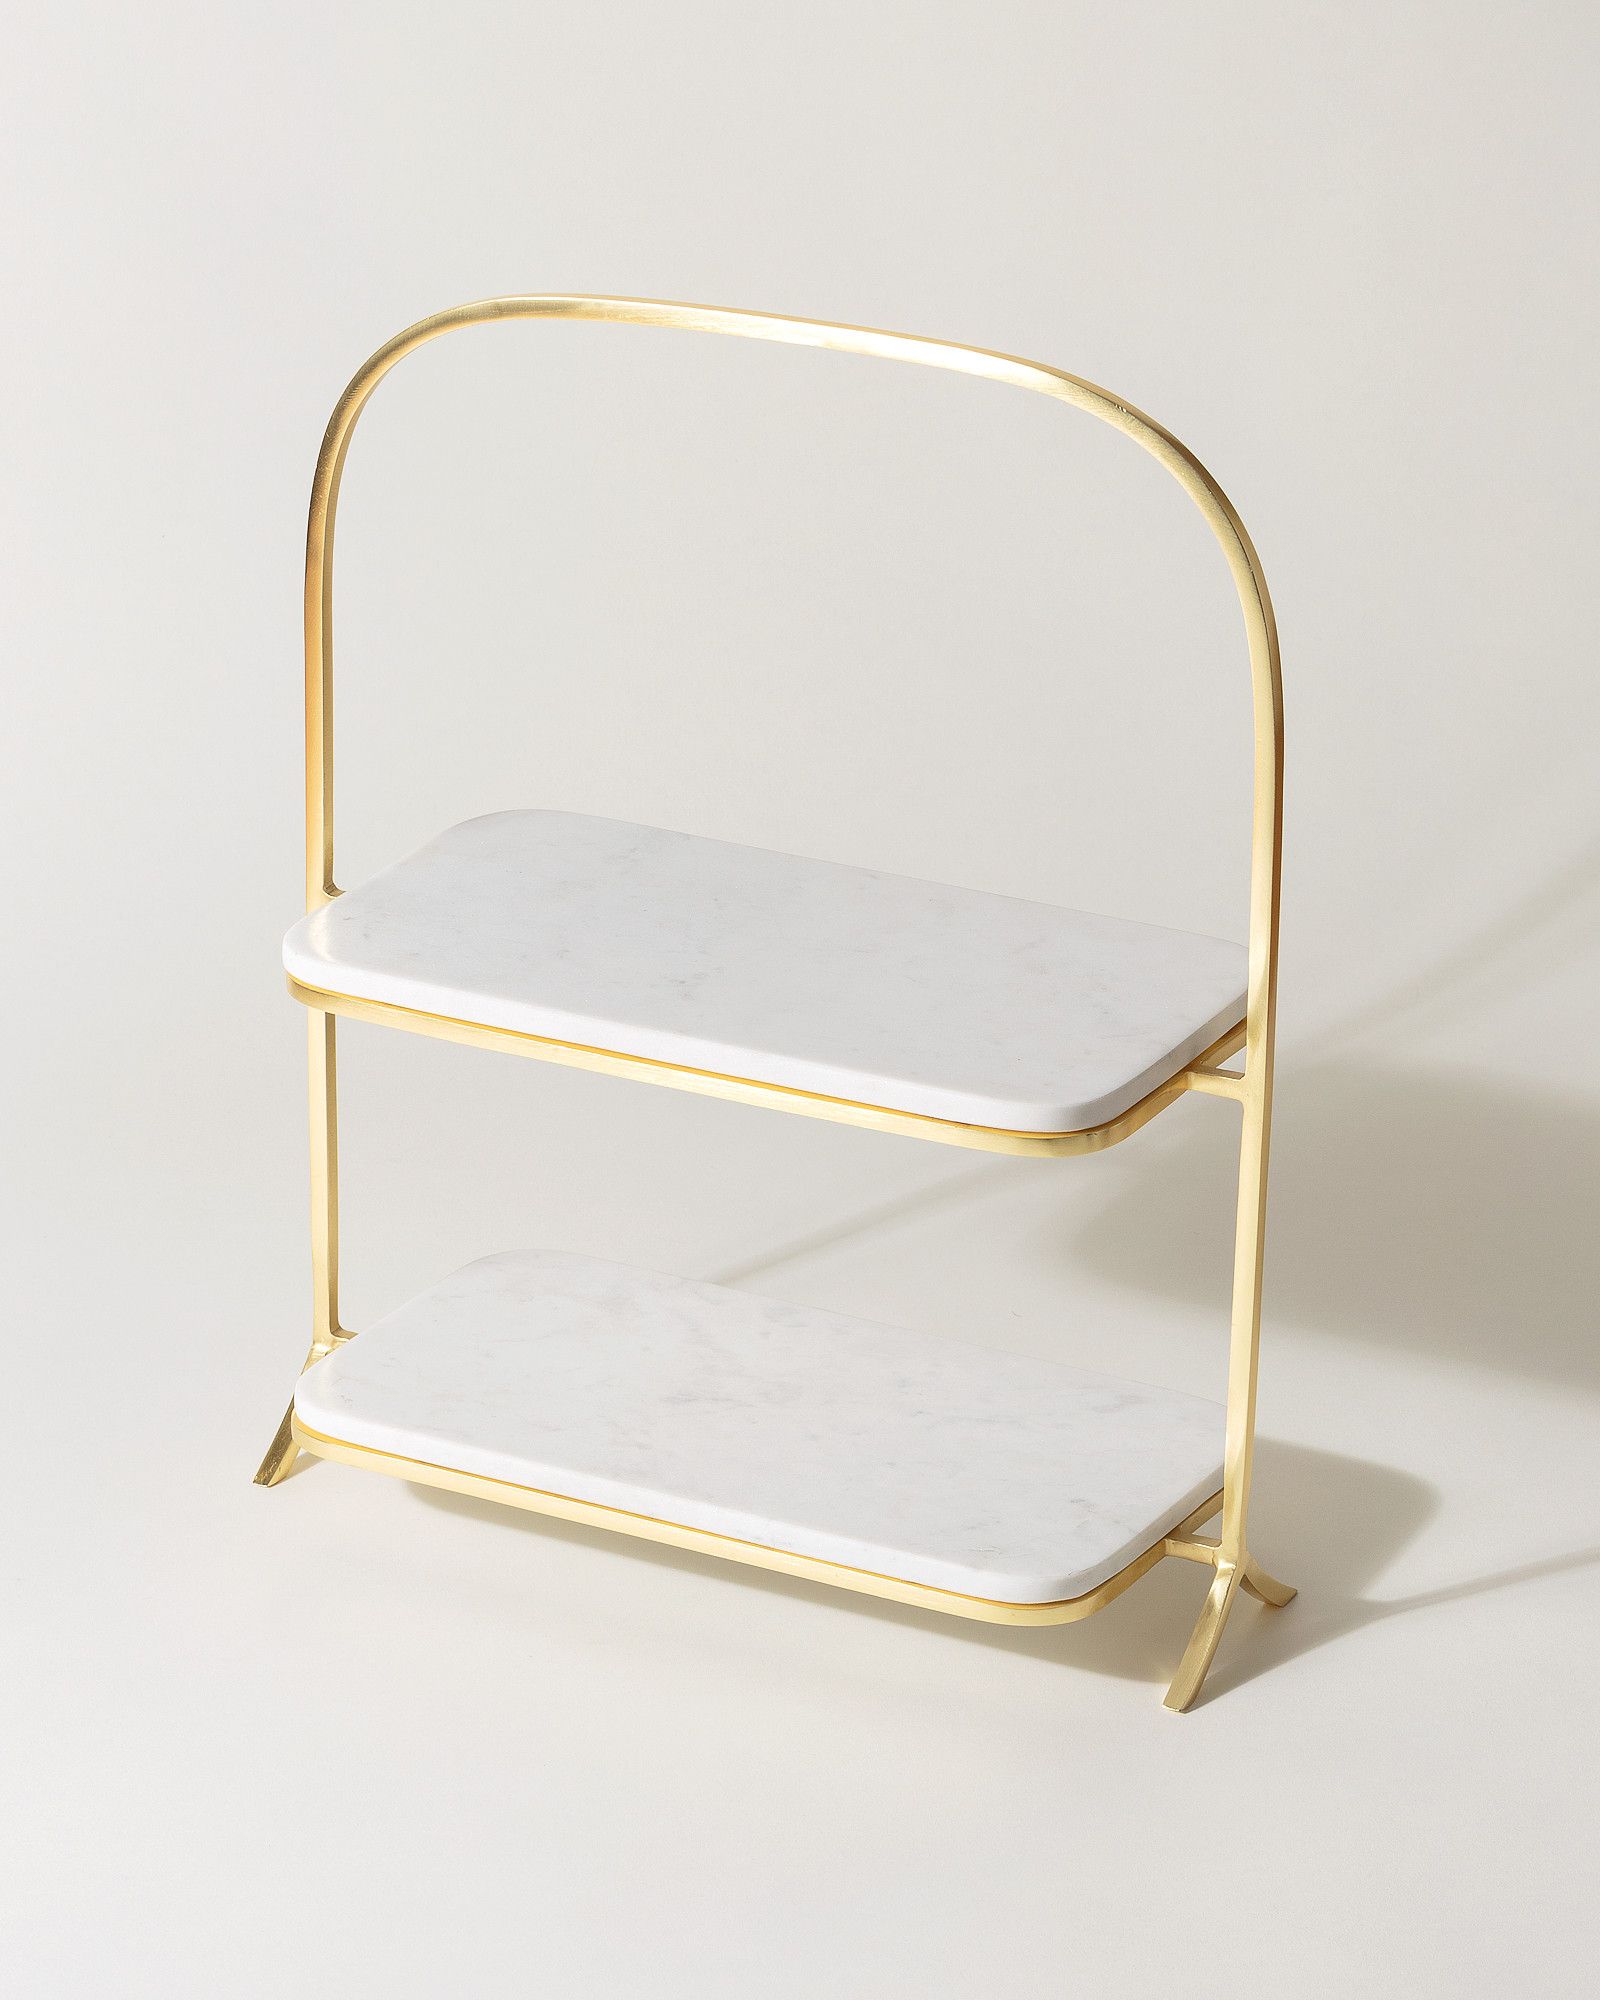 Marble Double Tier Cake Stand | Oliver Bonas